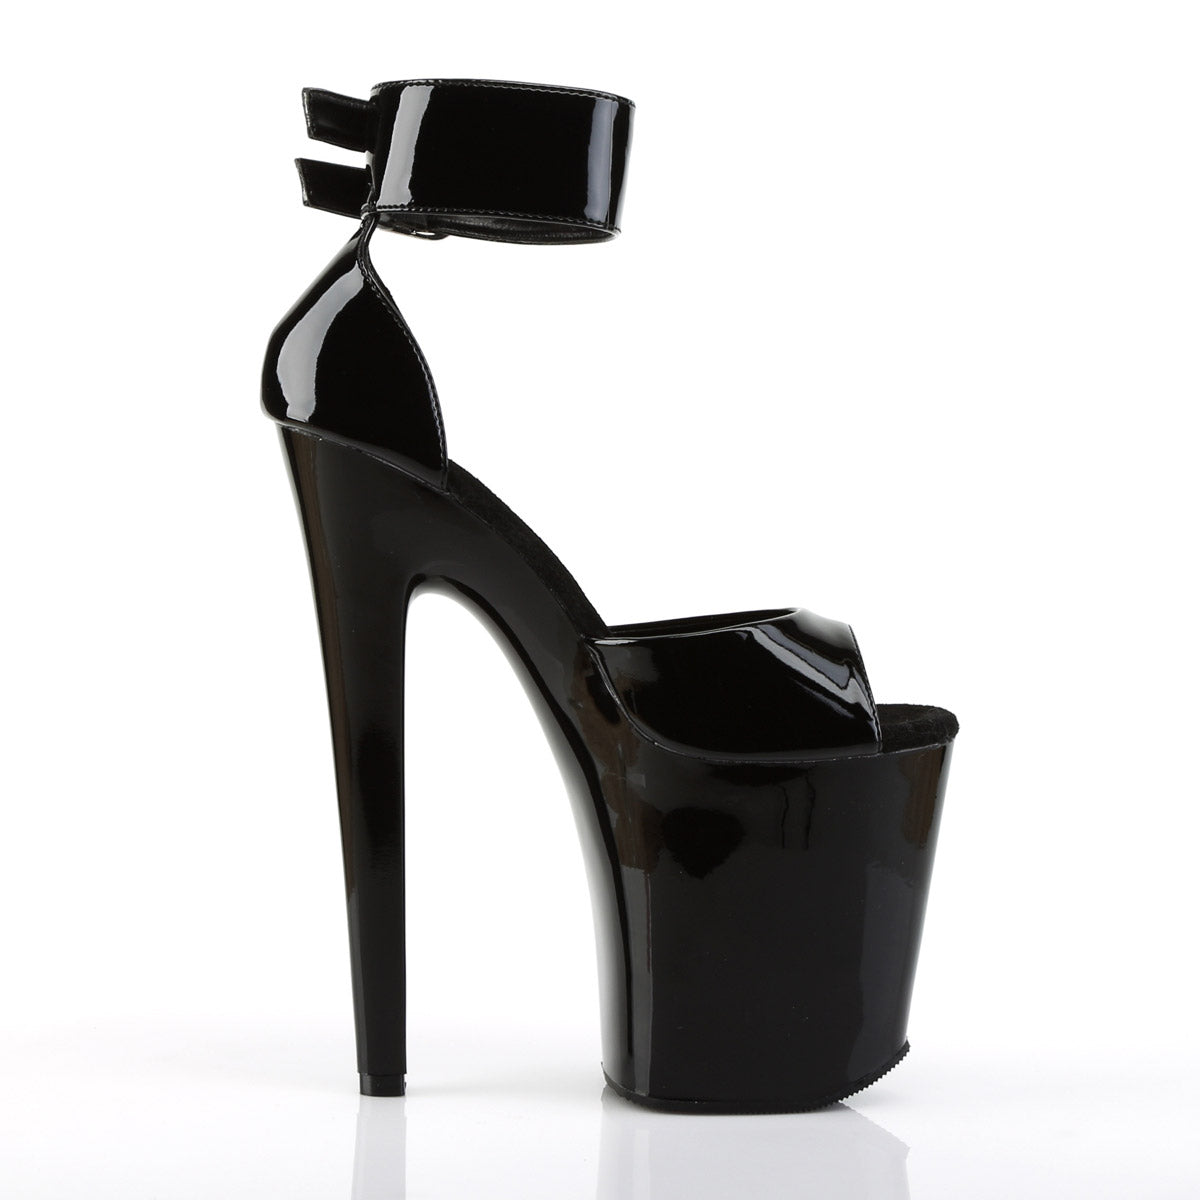 Sexy Ankle Cuff Peep Toe D'Orsay Platform Stiletto High Heels Shoes Pleaser Pleaser XTREME/875